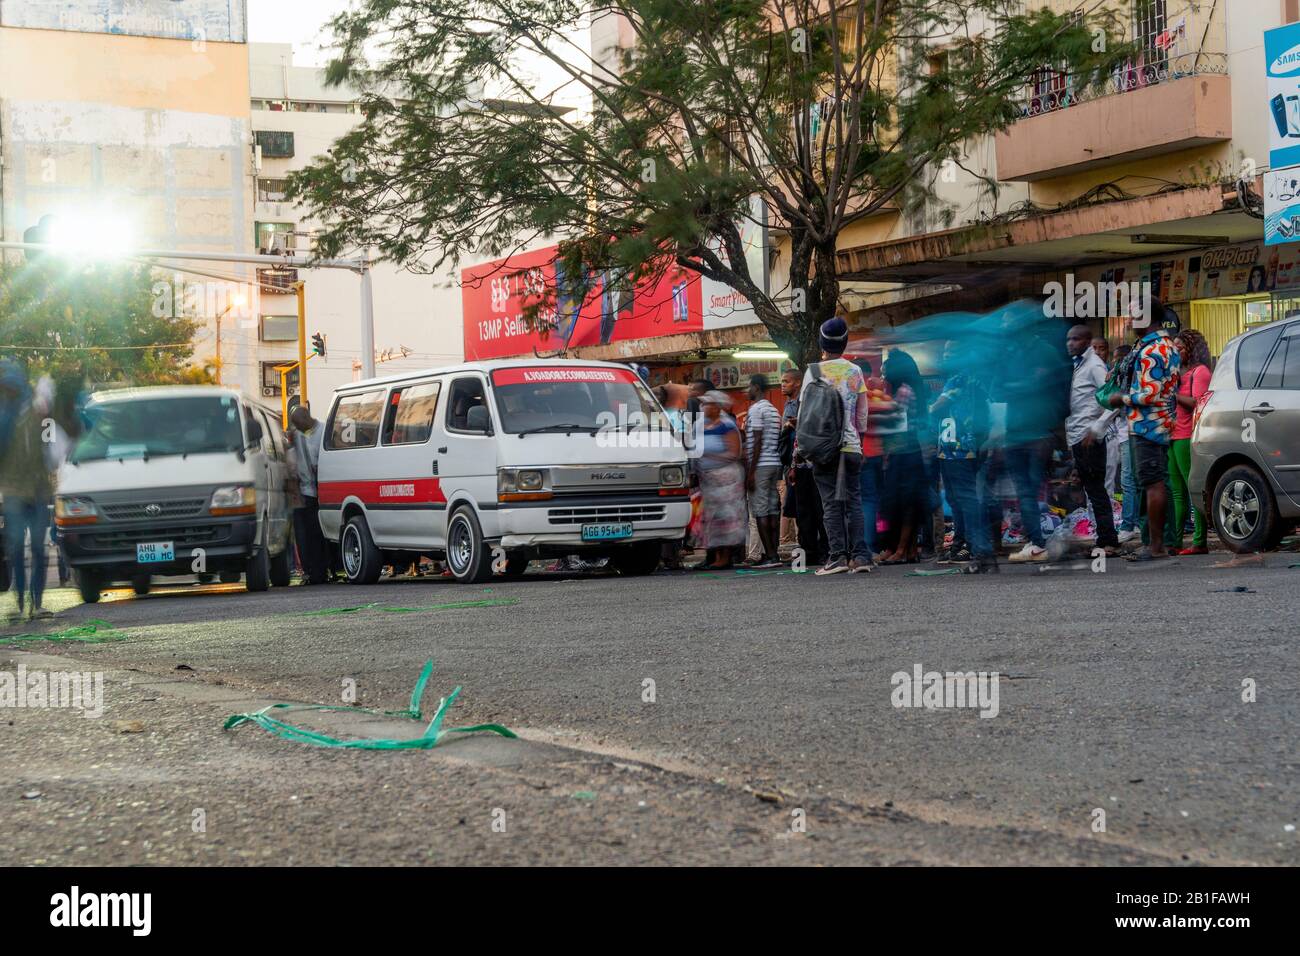 Maputo, Mozambique - May 15, 2019: Many local people entering a bus in the capital city Stock Photo